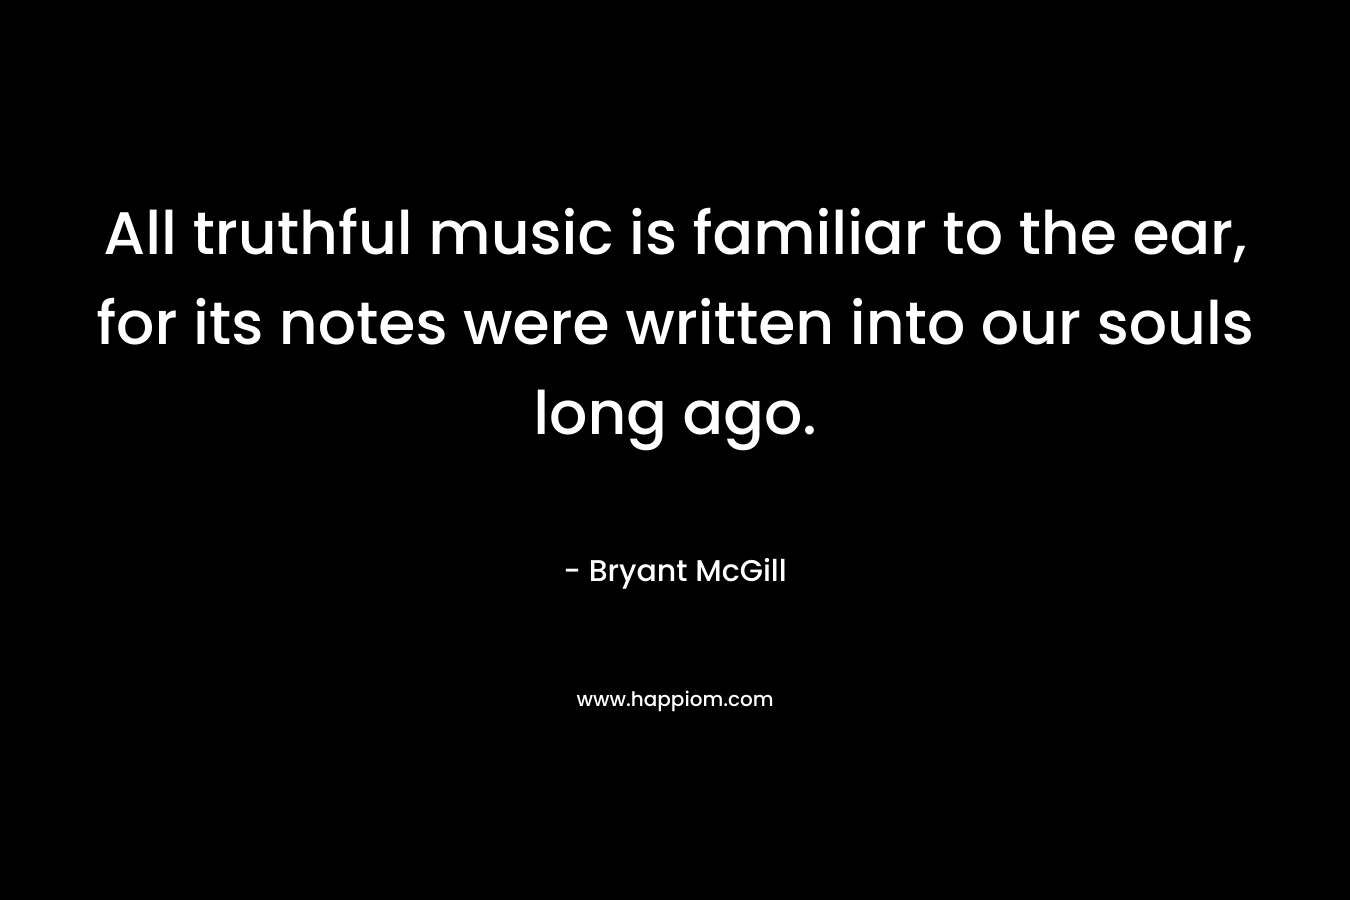 All truthful music is familiar to the ear, for its notes were written into our souls long ago. – Bryant McGill